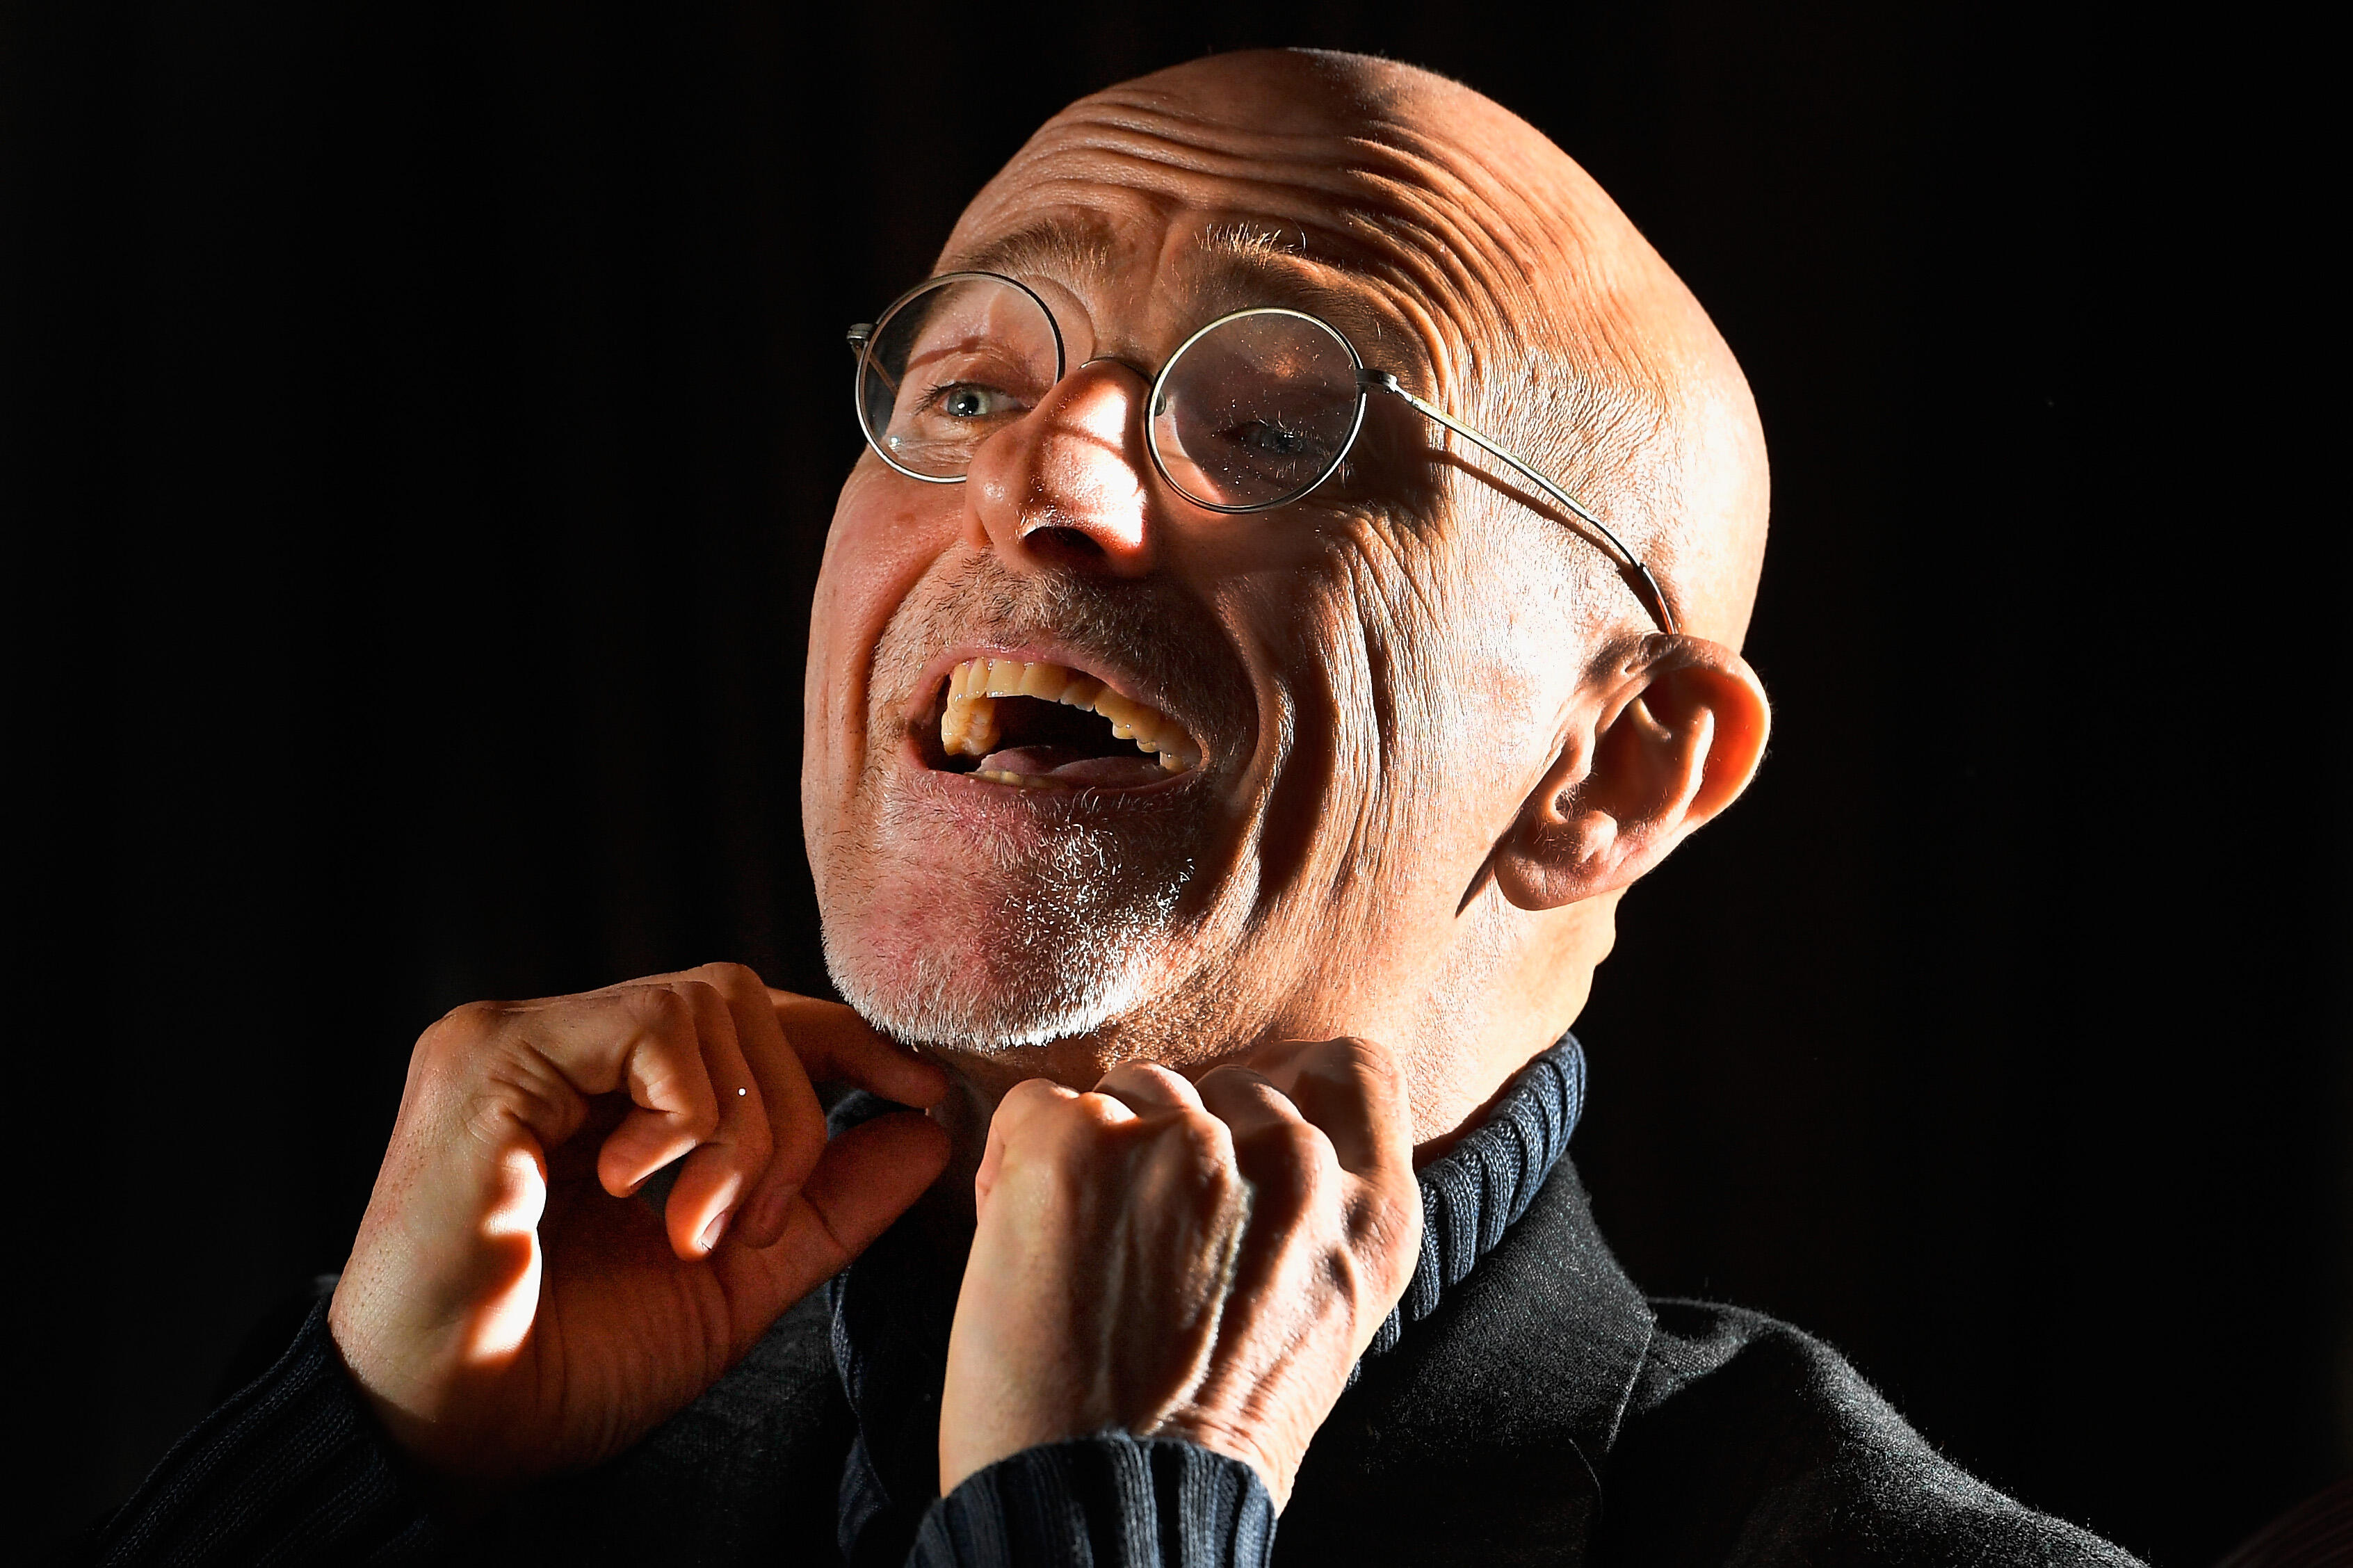 Neurosurgeon Sergio Canavero is set to announce more details about his controversial head transplant surgery...